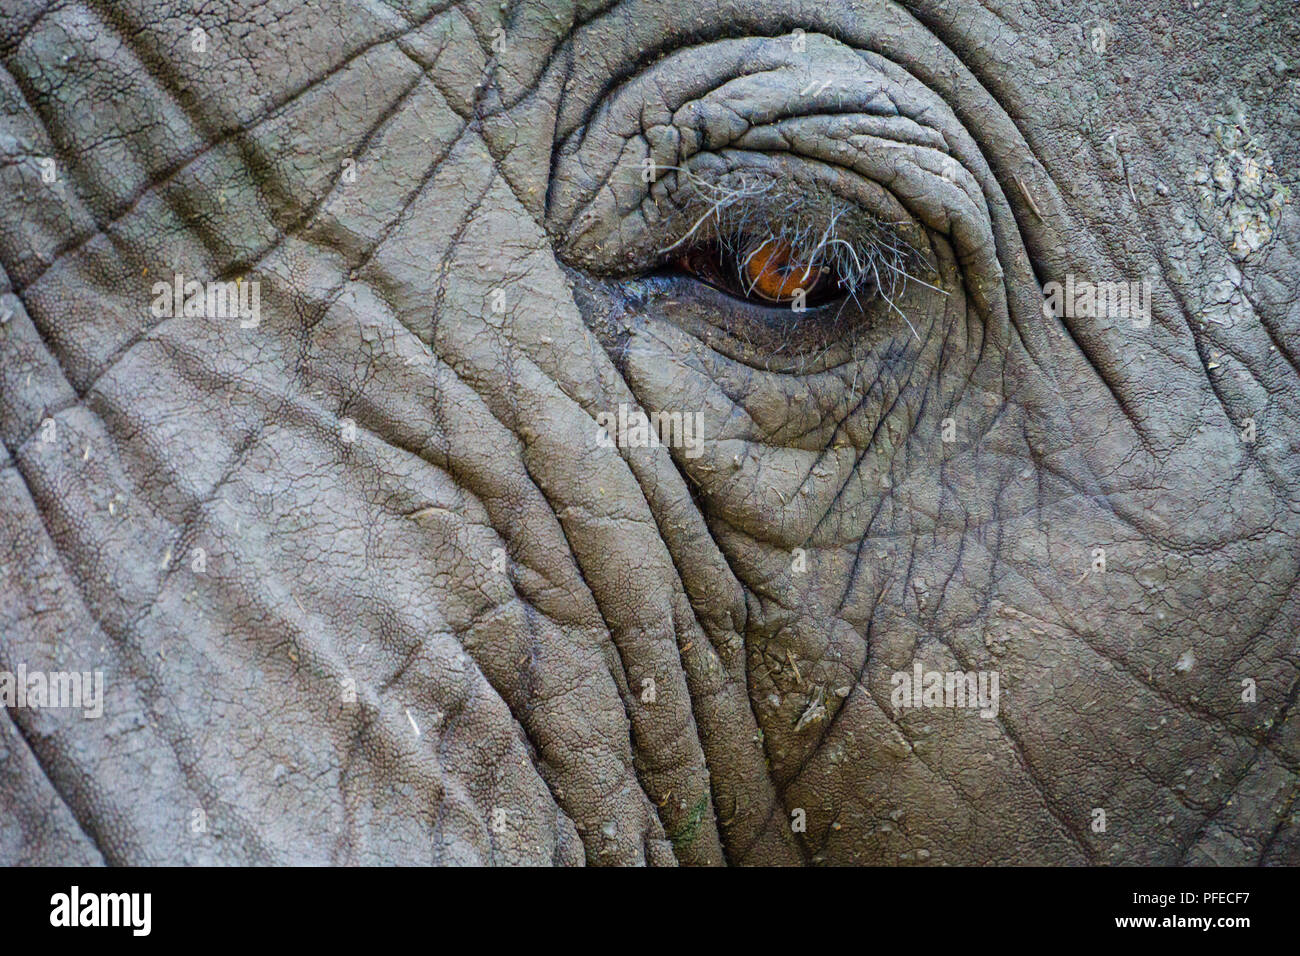 Close up of African Elephant's eye ball Banque D'Images